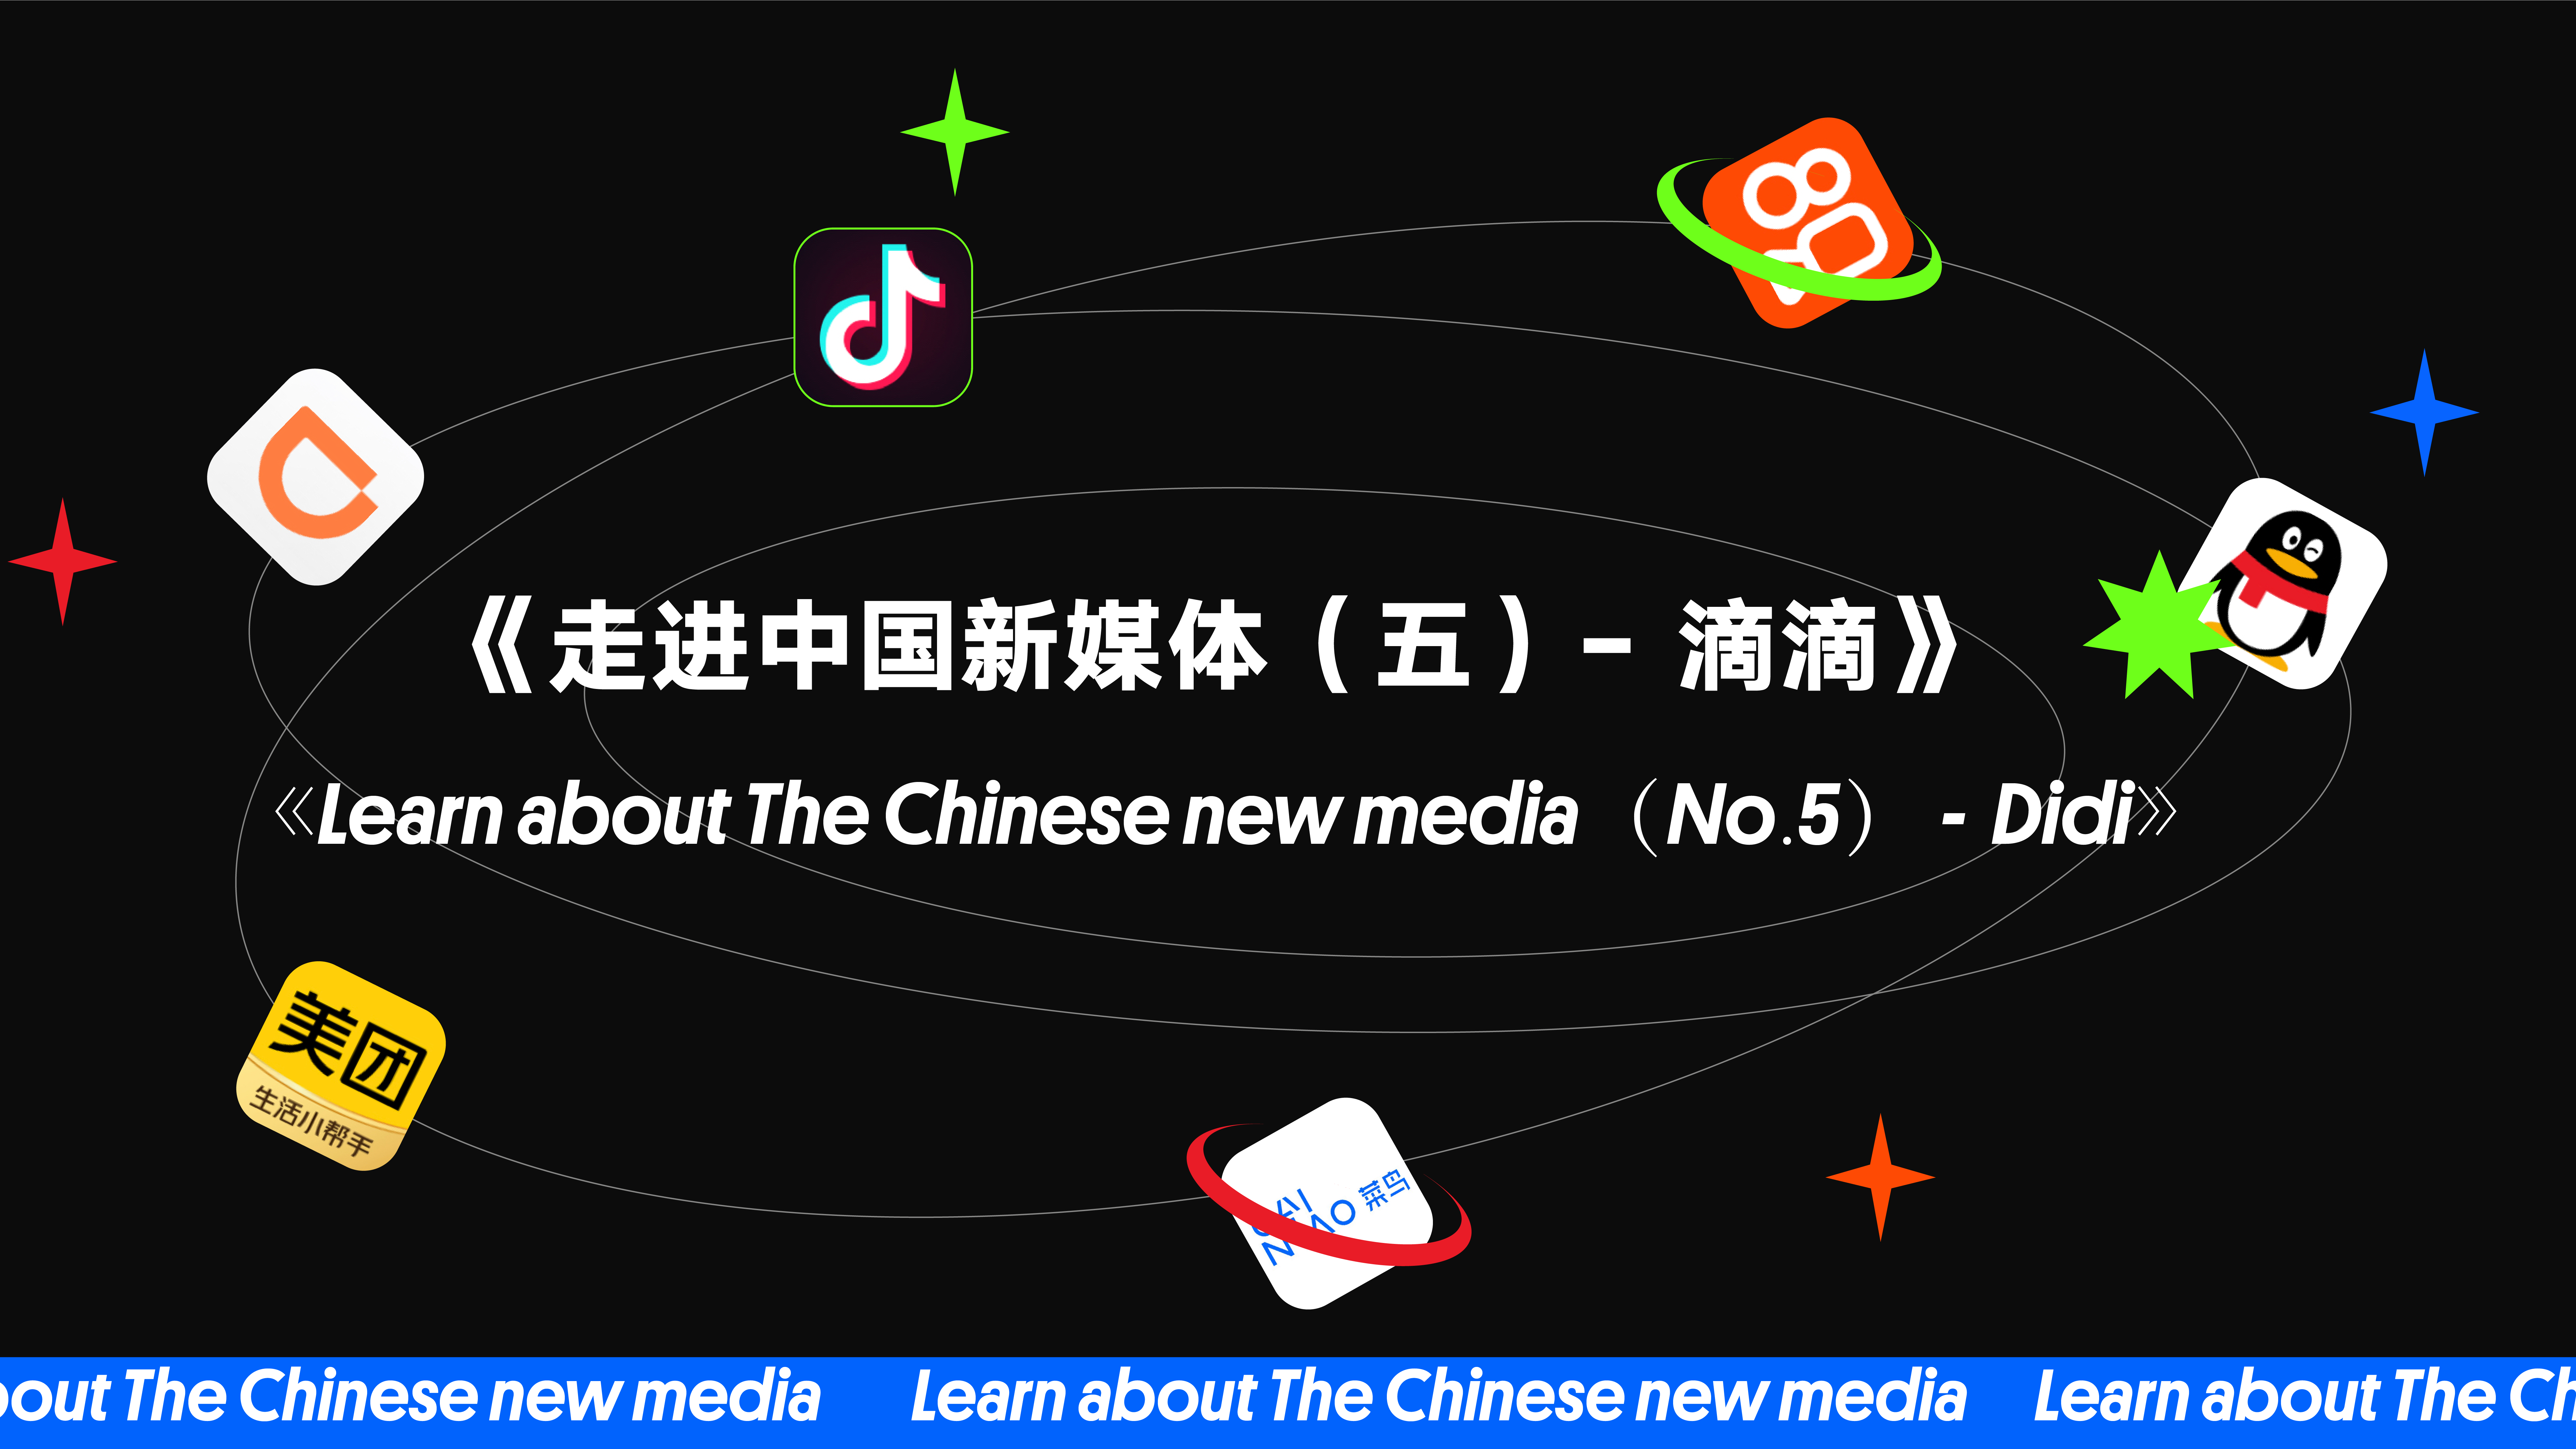 《Learn about The Chinese new media（No.5）— Didi》